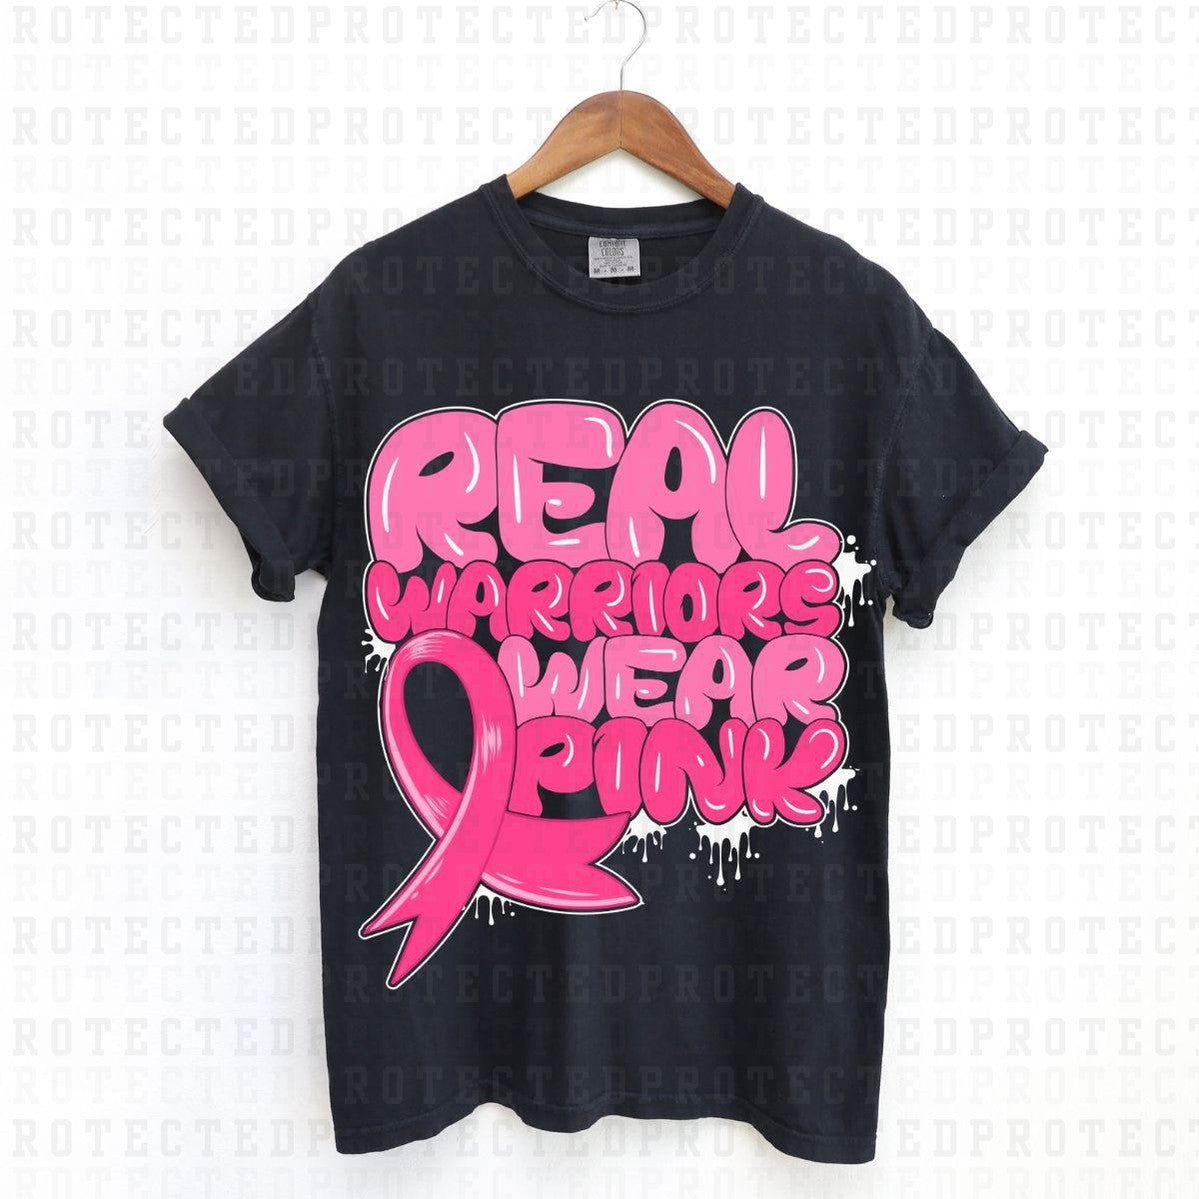 REAL WARRIORS WEAR PINK *BREAST CANCER AWARENESS* - DTF TRANSFER